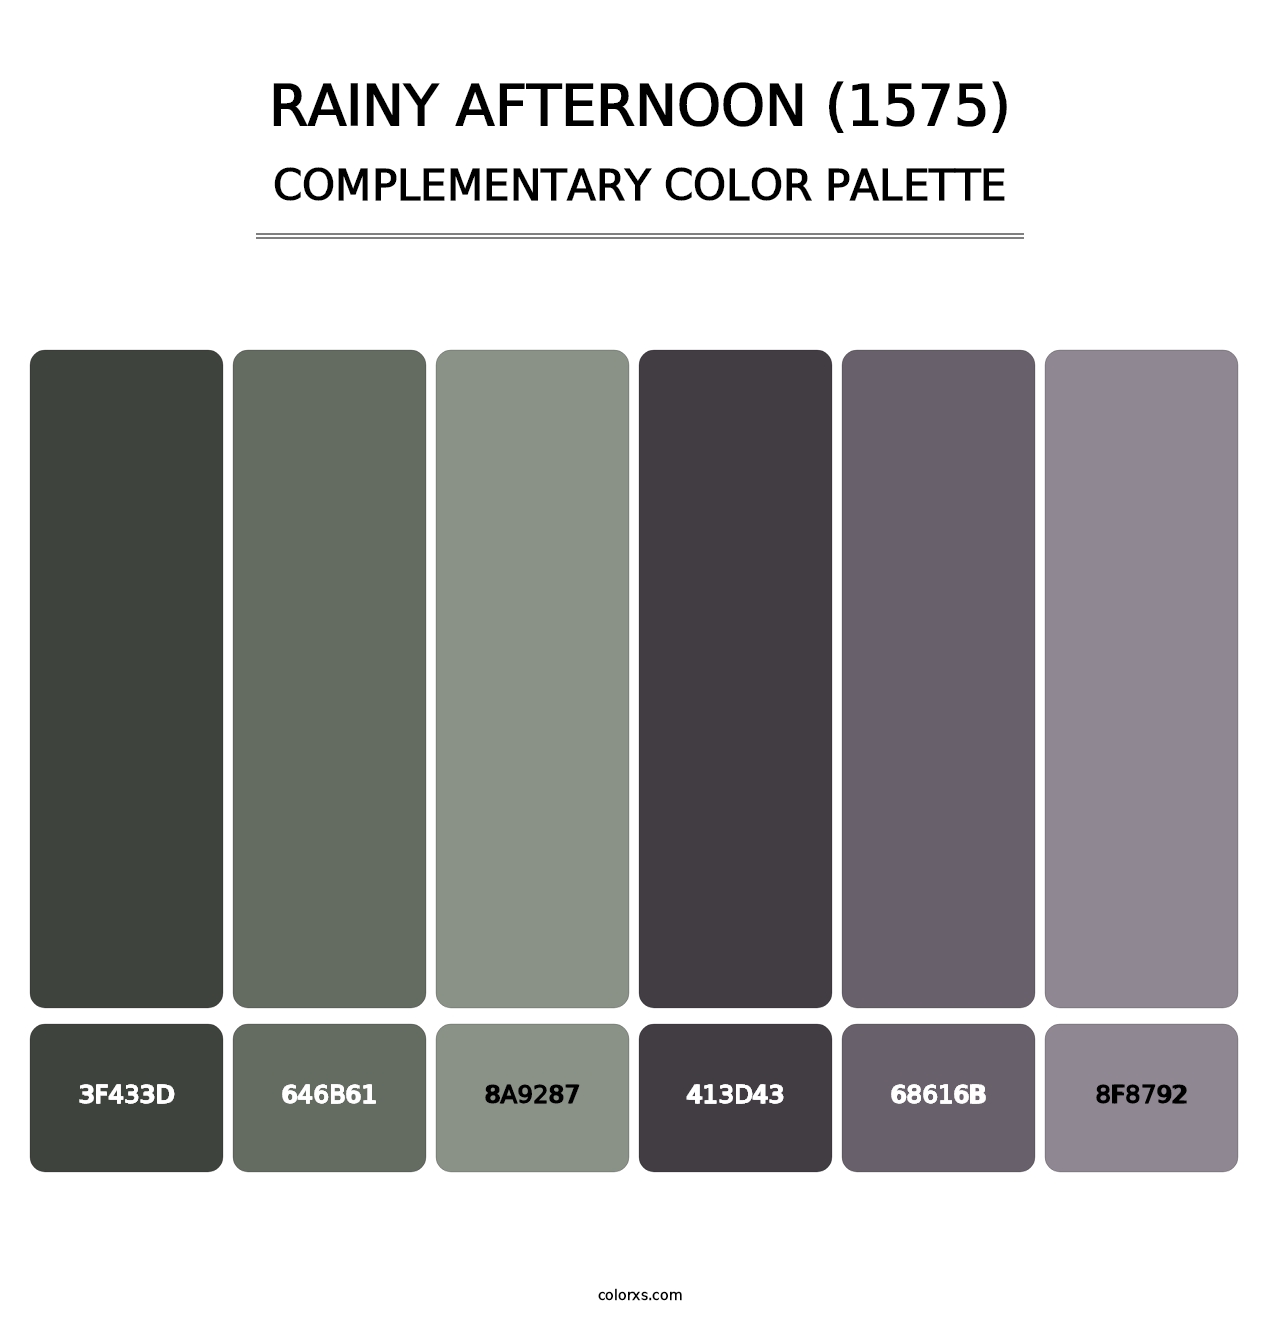 Rainy Afternoon (1575) - Complementary Color Palette